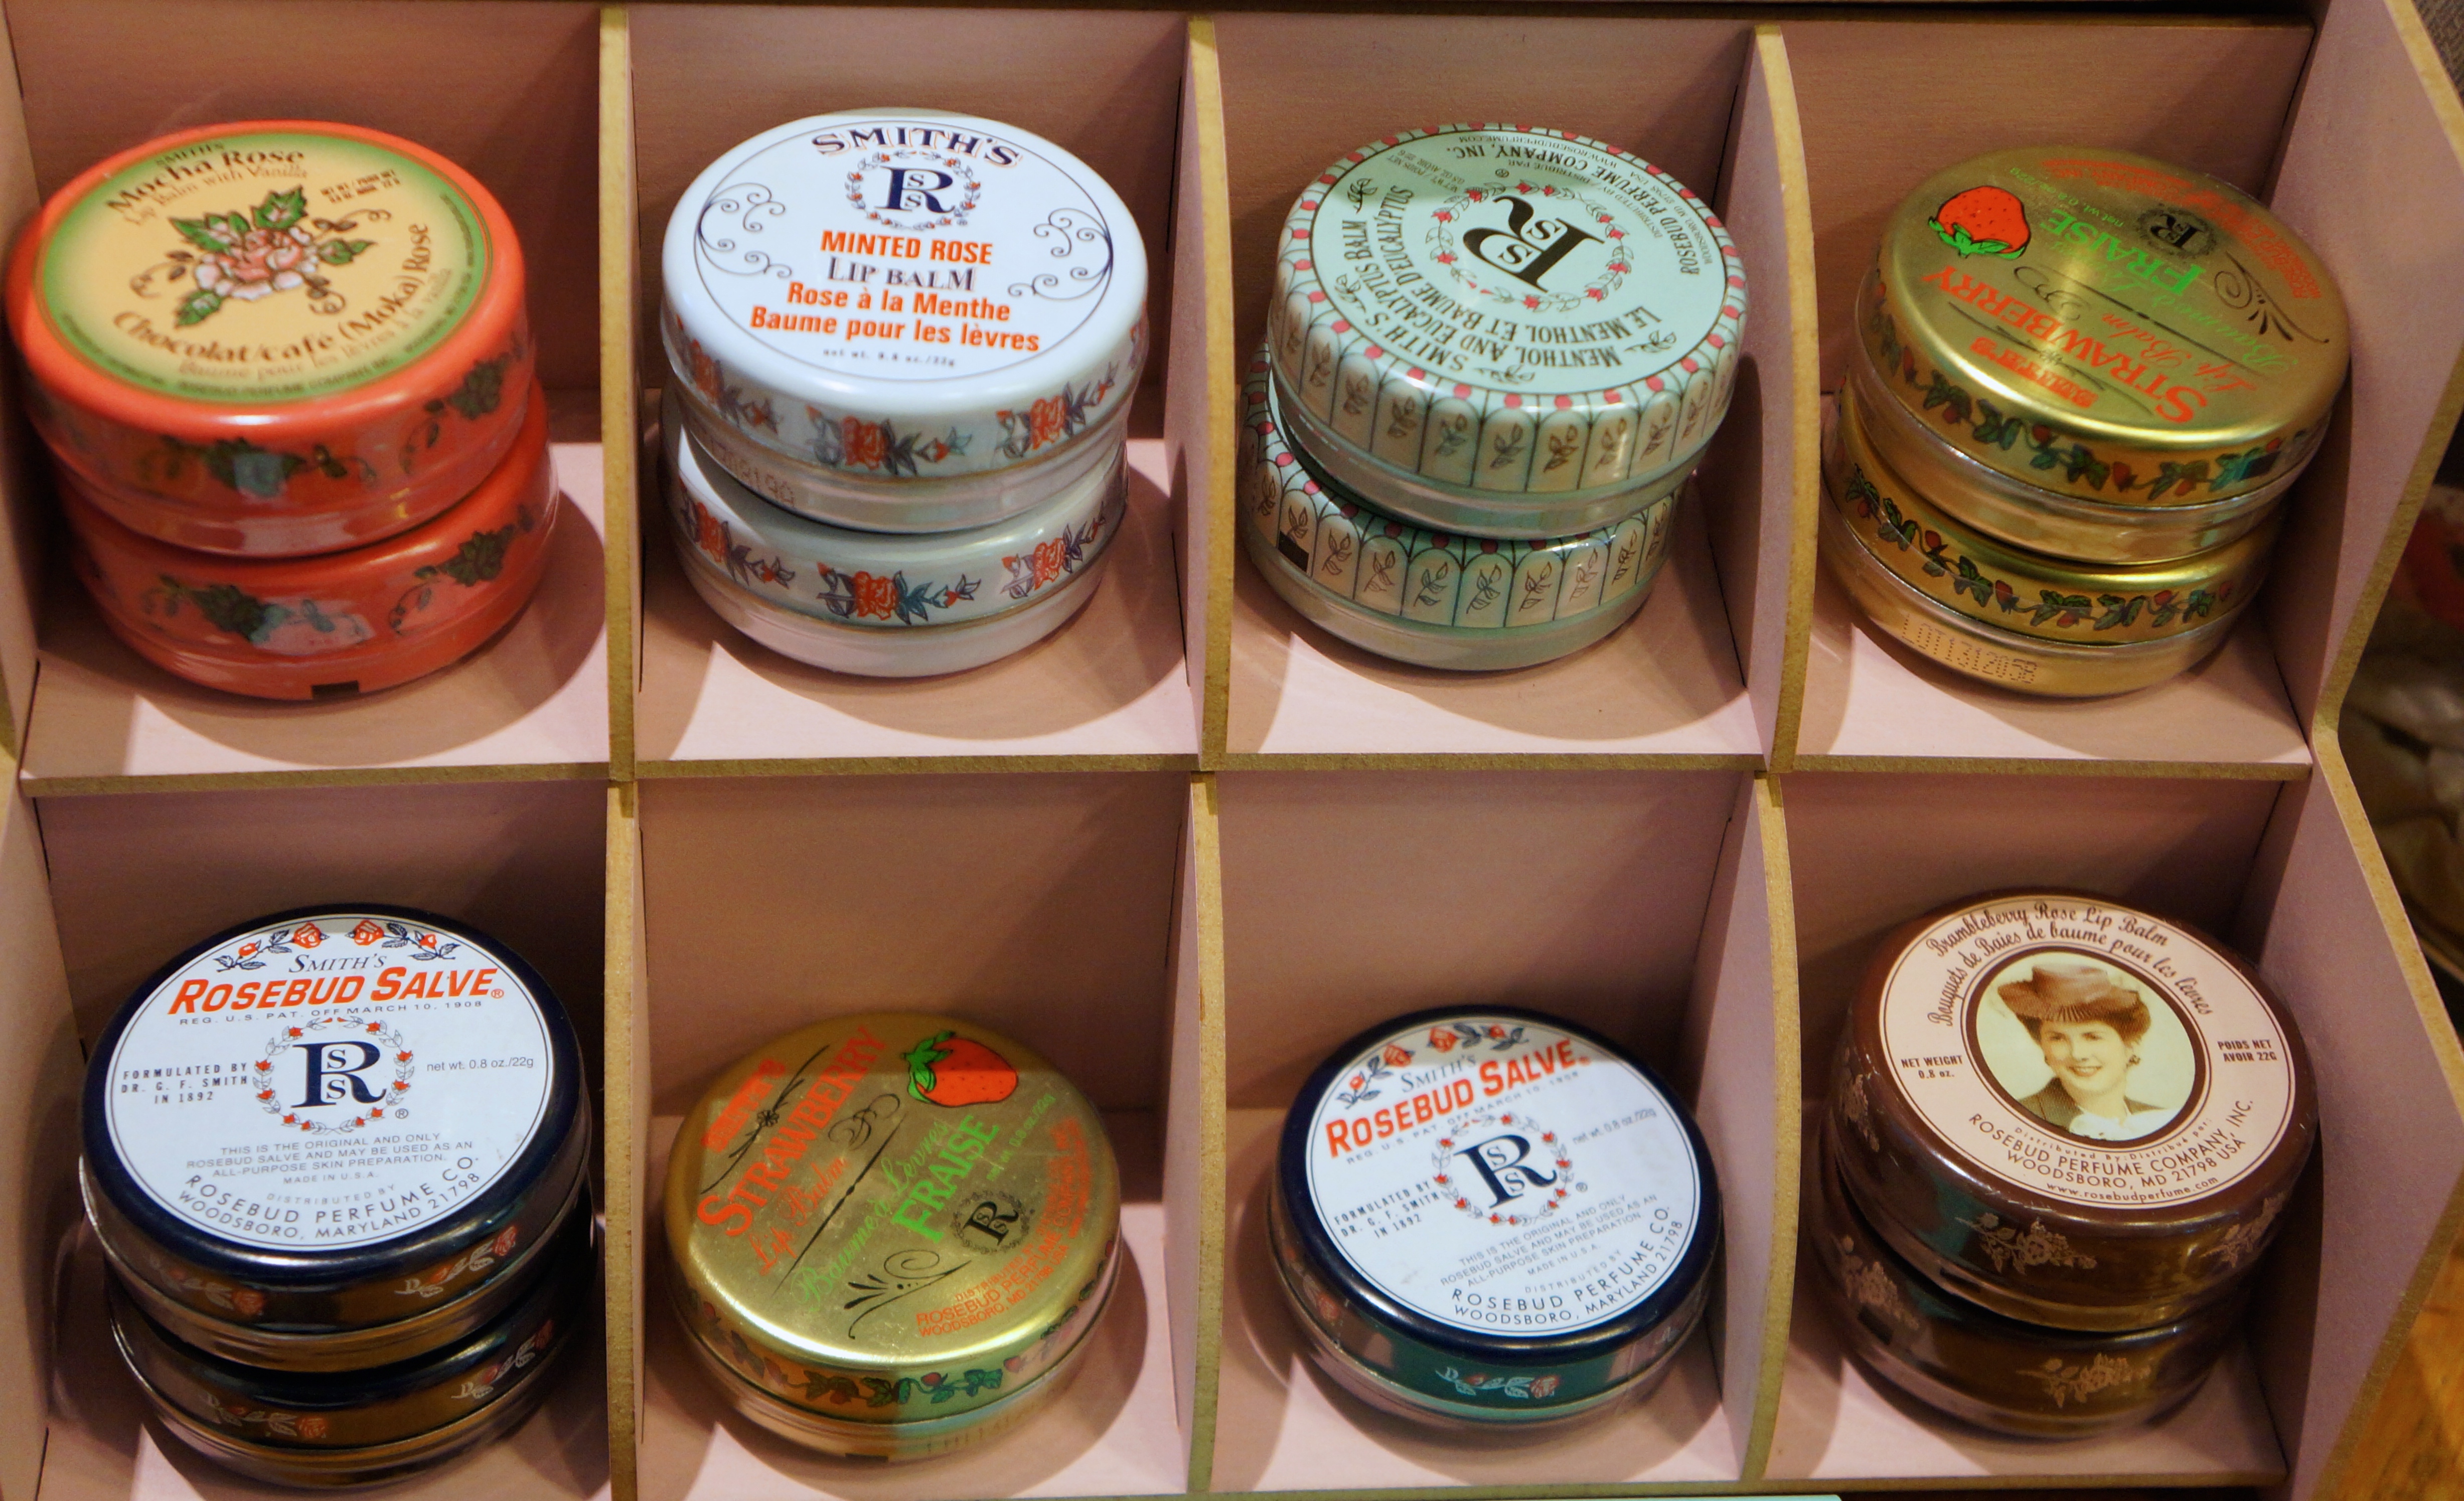 Smith's lipbalms at Le Boudoir de Jeanne/ Pic by kiwikoo.